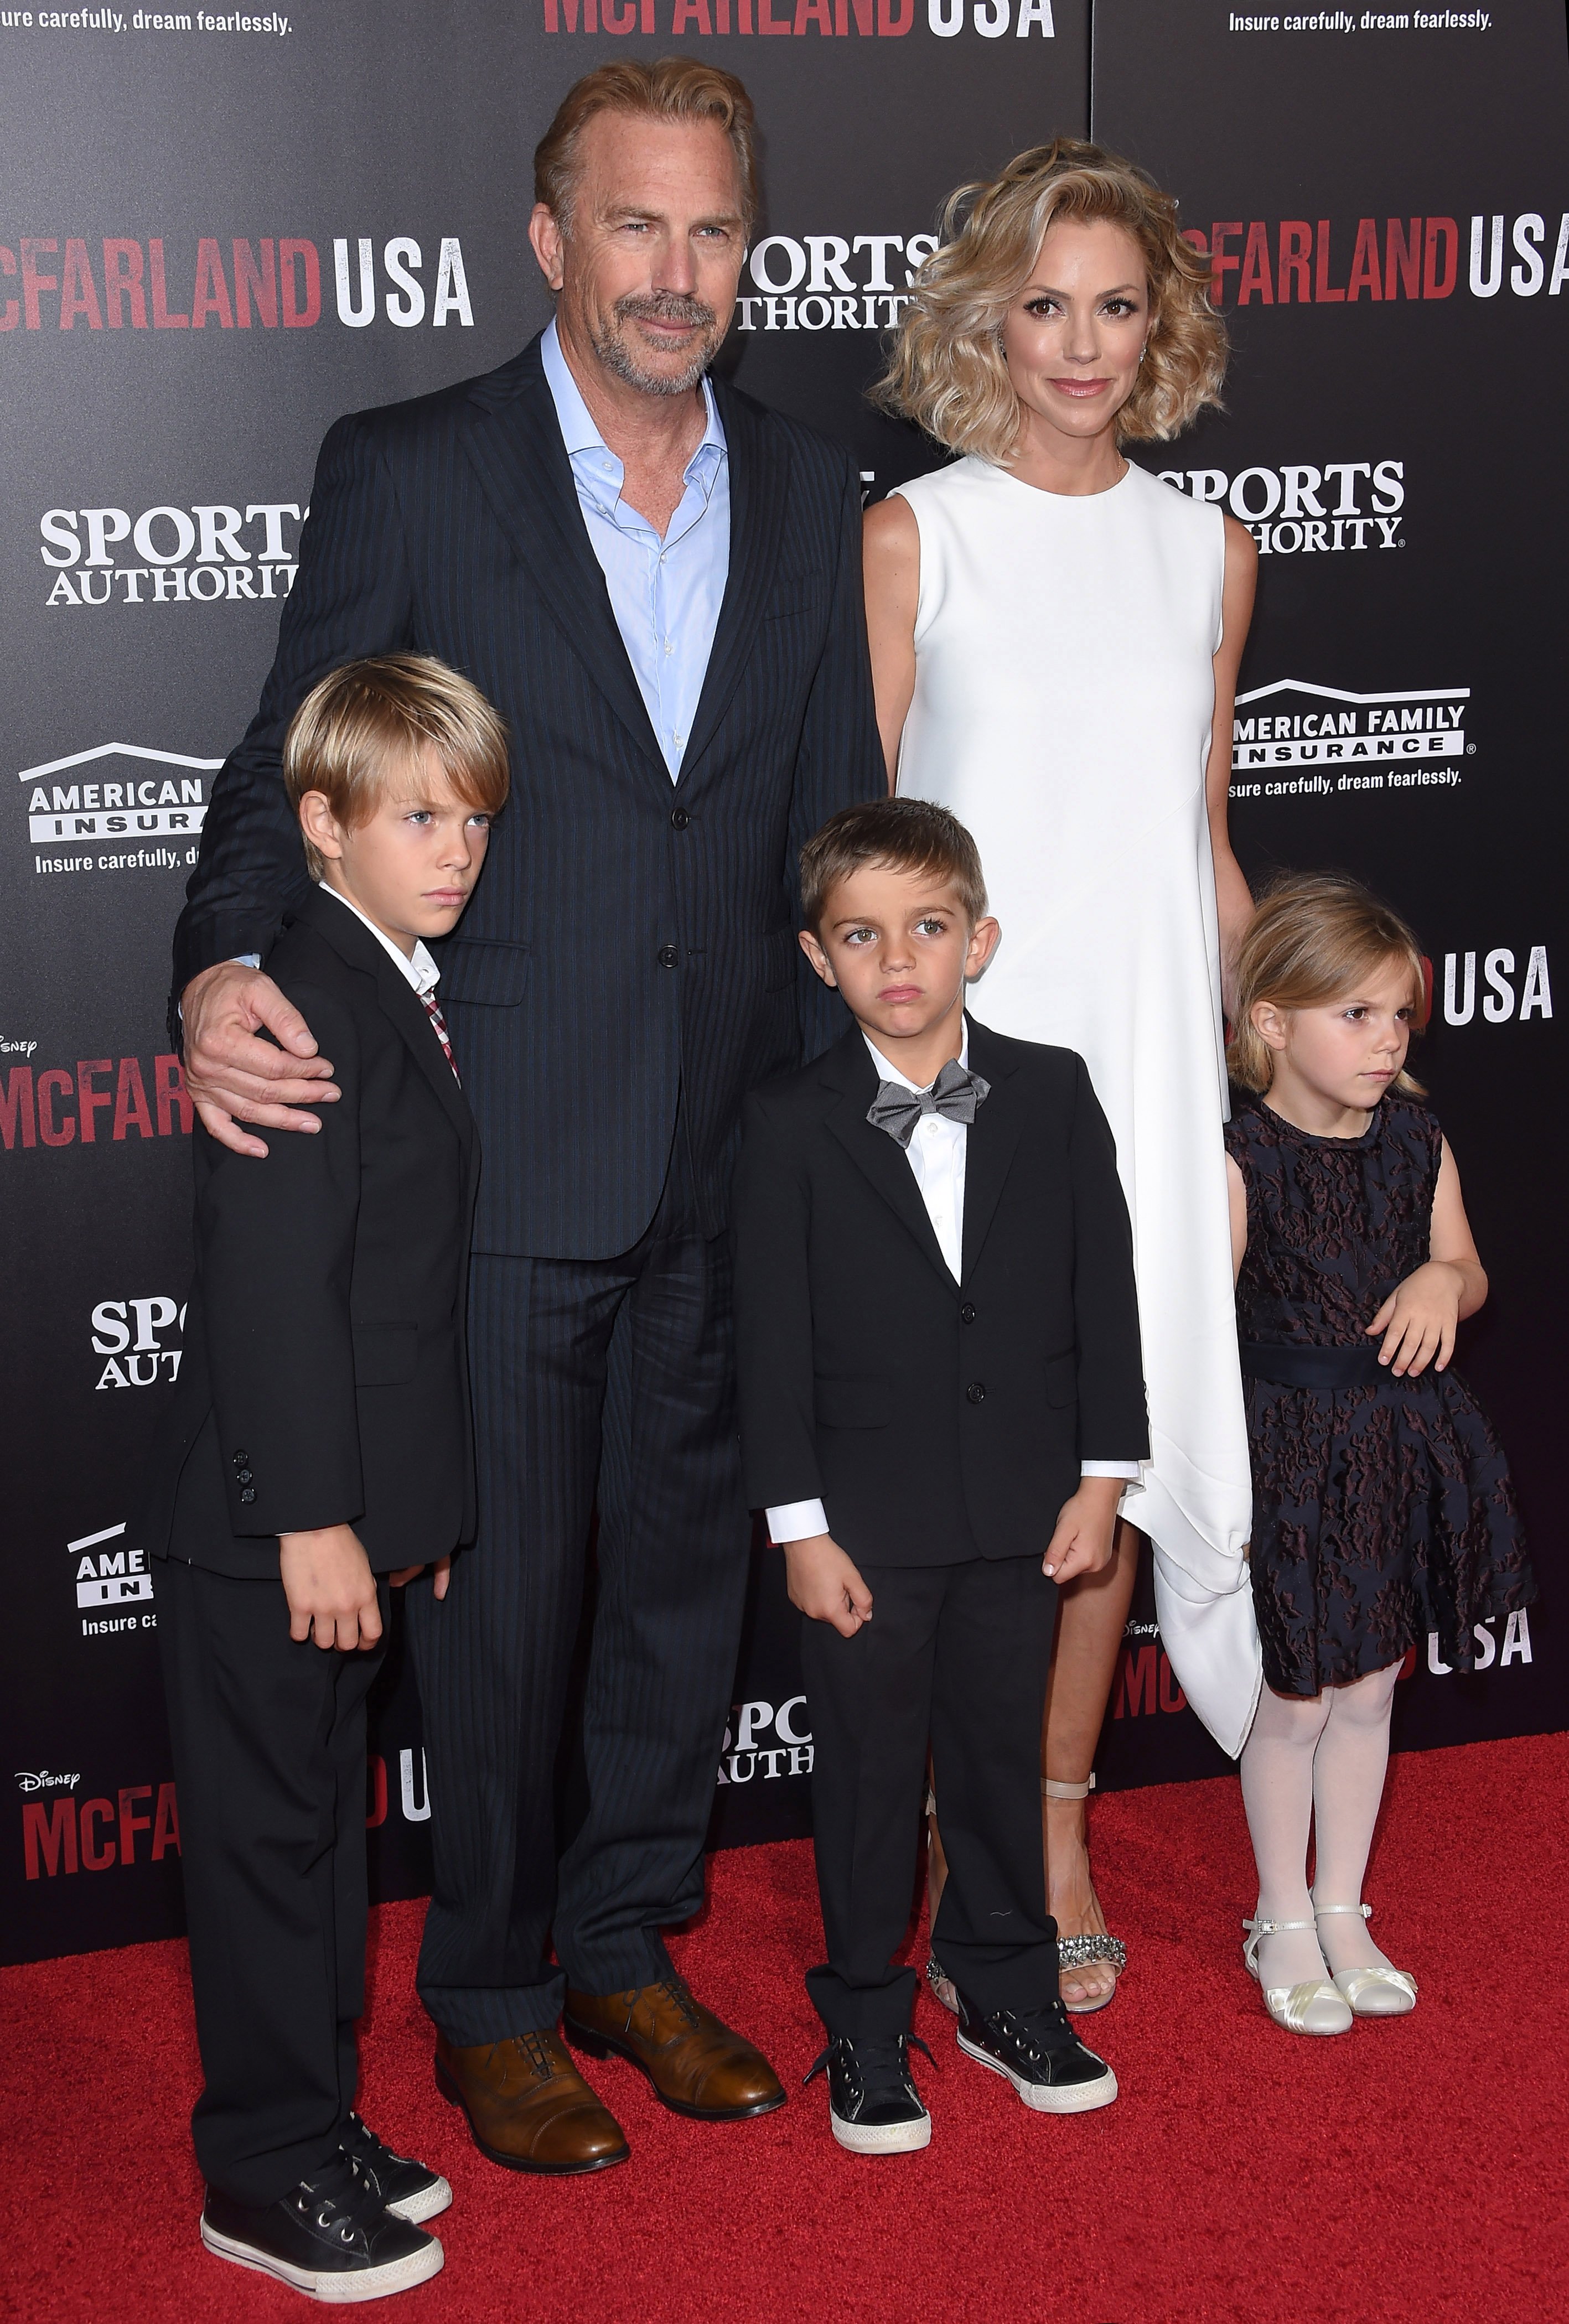 Actor Kevin Costner, wife Christine Baumgartner and children Grace Avery Costner, Hayes Logan Costner and Cayden Wyatt Costner arrive at the World Premiere of Disney's 'McFarland, USA' at the El Capitan Theatre on February 9, 2015 in Hollywood, California. | Source: Getty Images